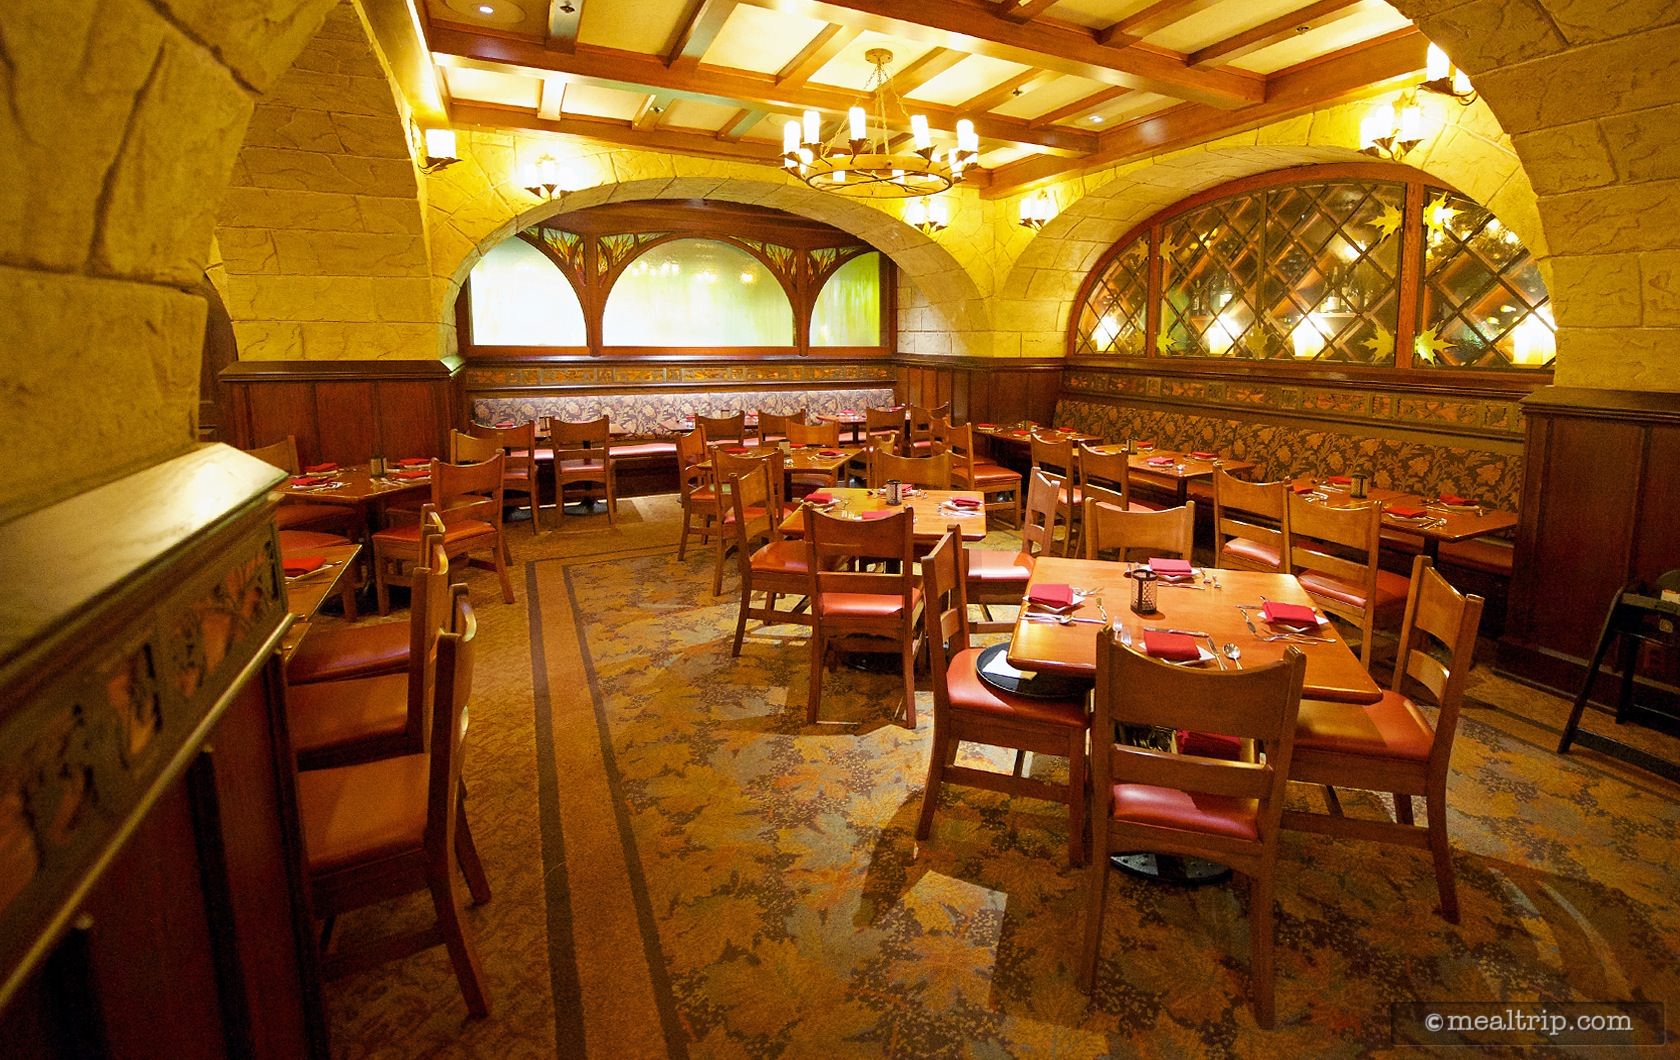 Photo Gallery for Le Cellier Steakhouse at Epcot